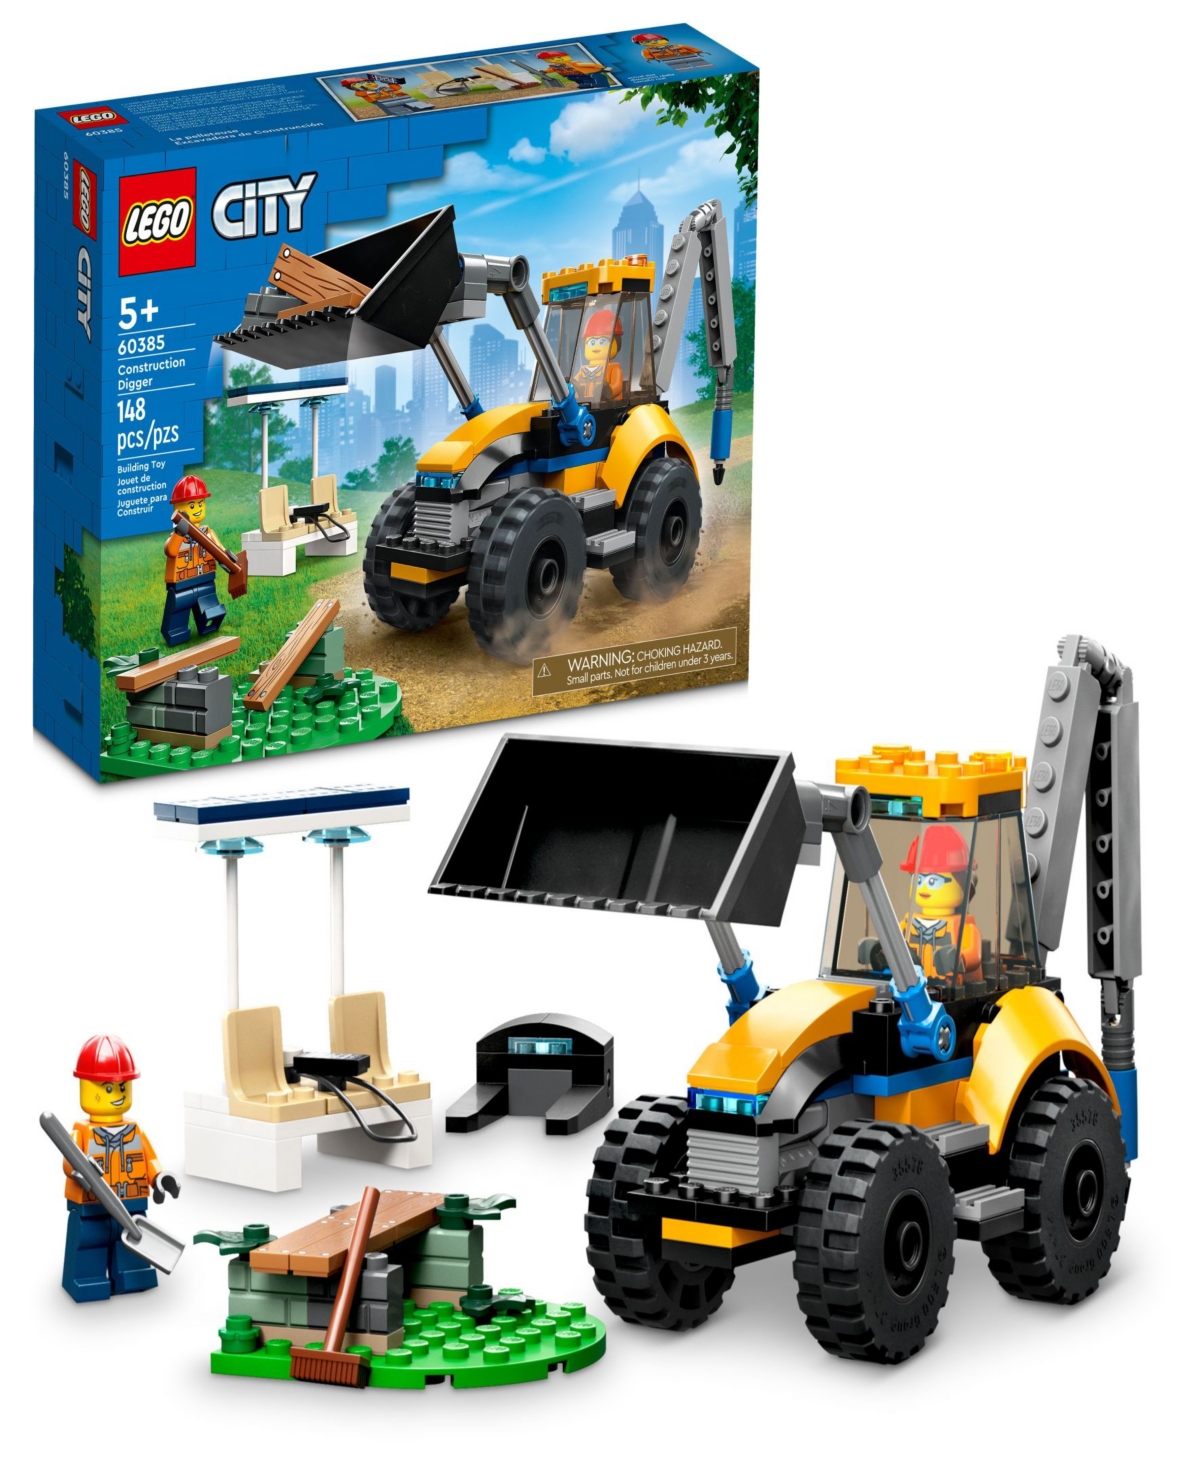 Lego City Great Vehicles Construction Digger 60385 Building Set, 148 Pieces In Multicolor